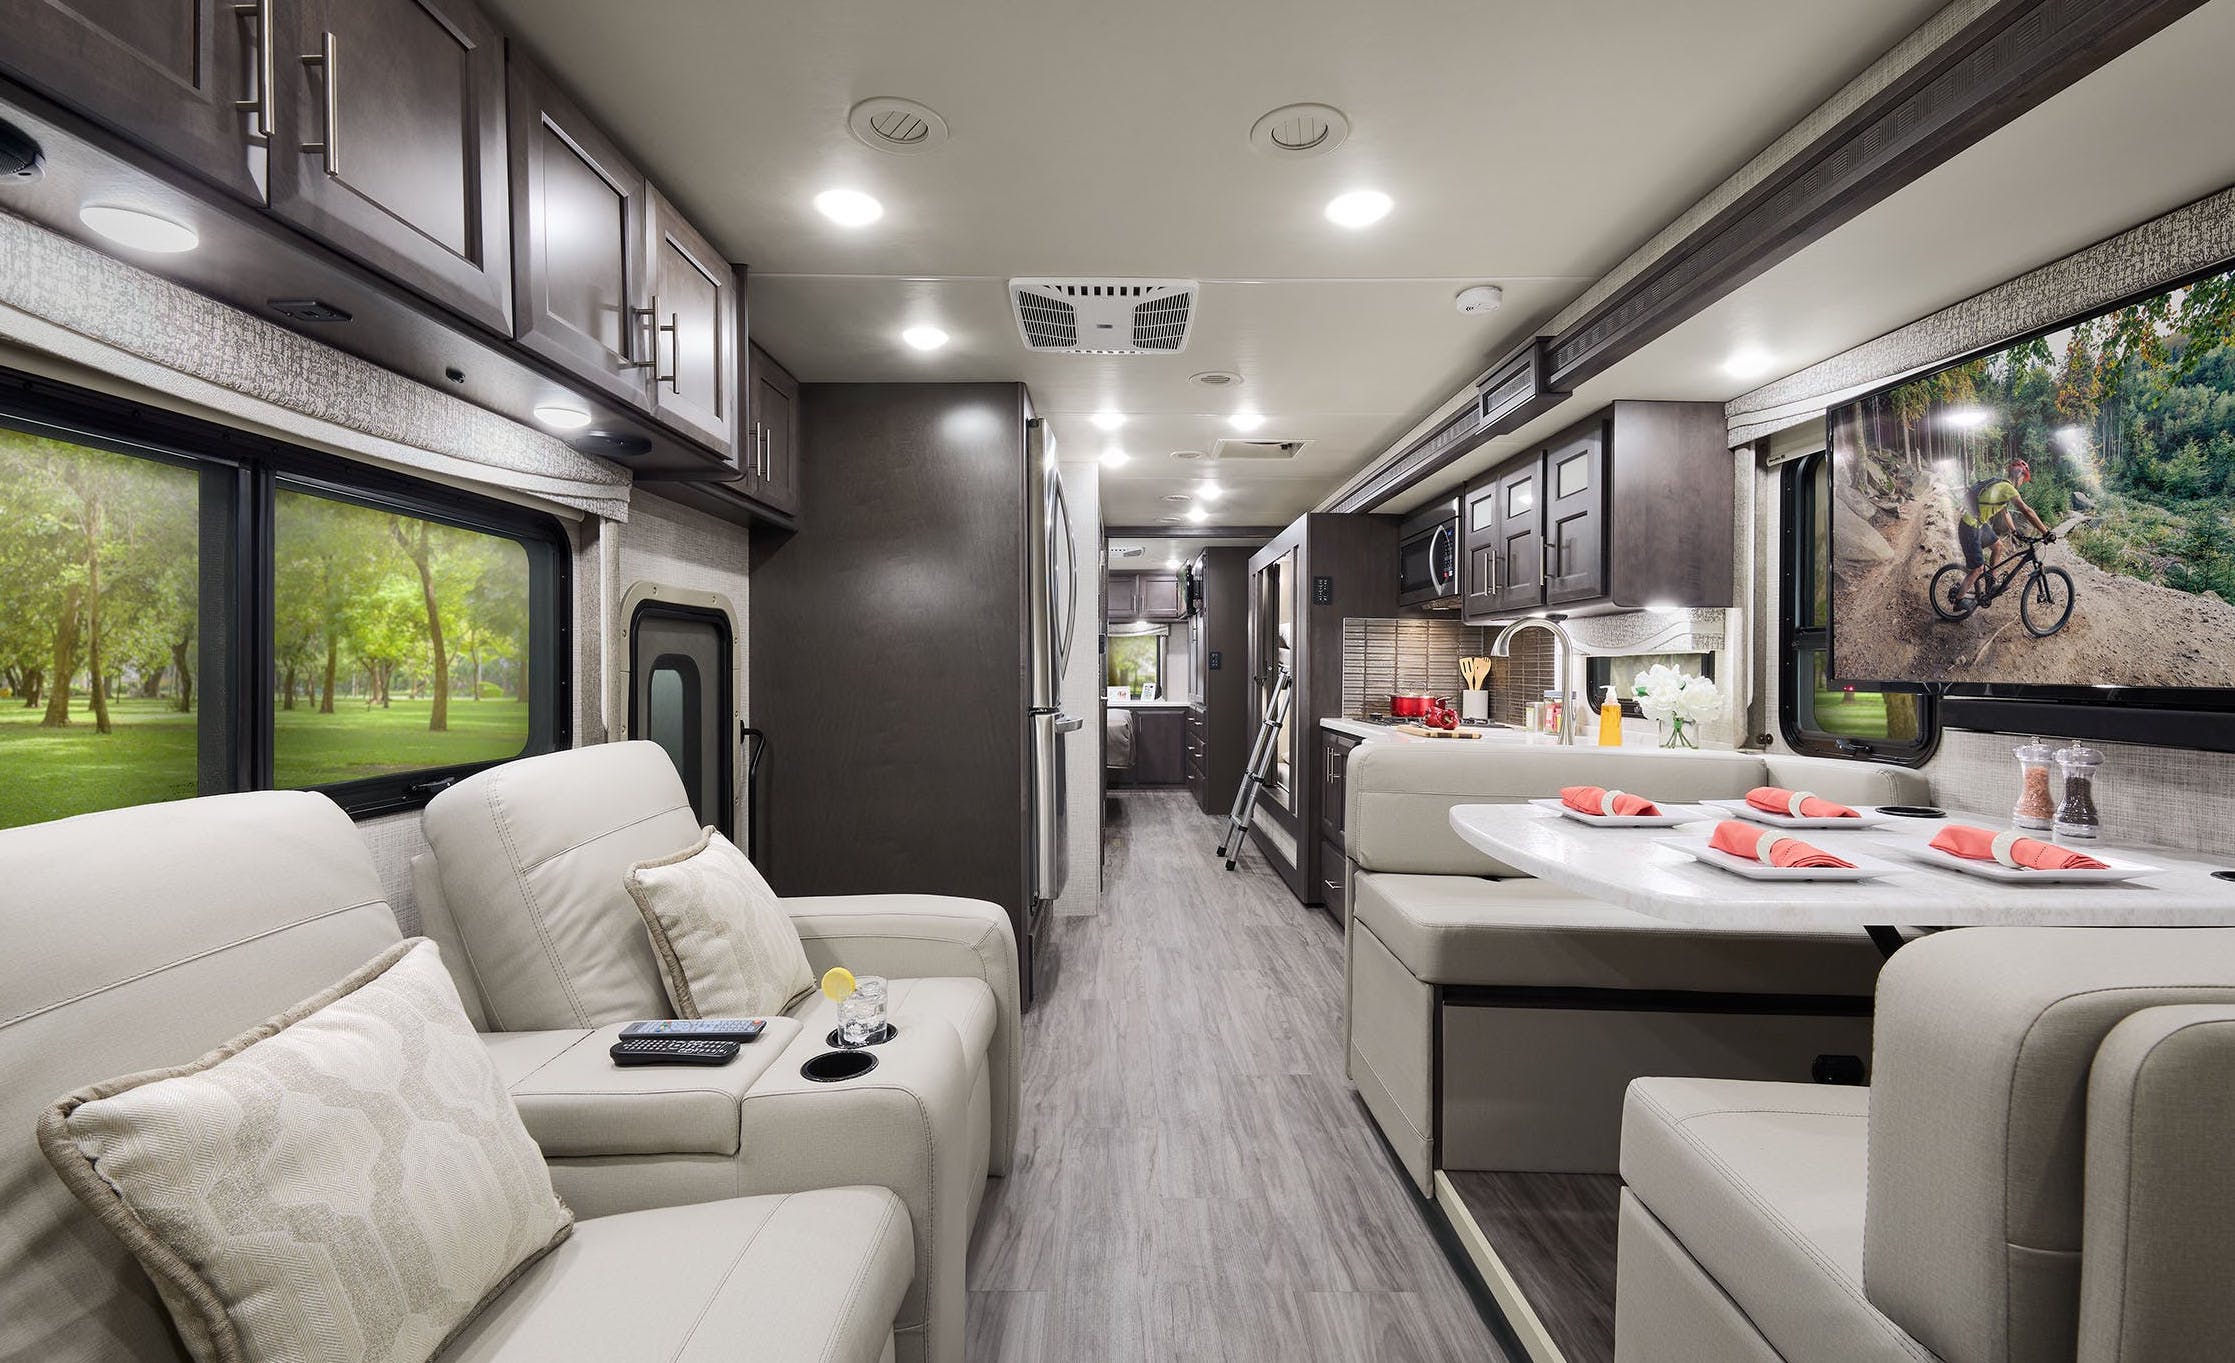 350k pasadena class c motorhome aims to pull in your cash like a moth to a flame 5